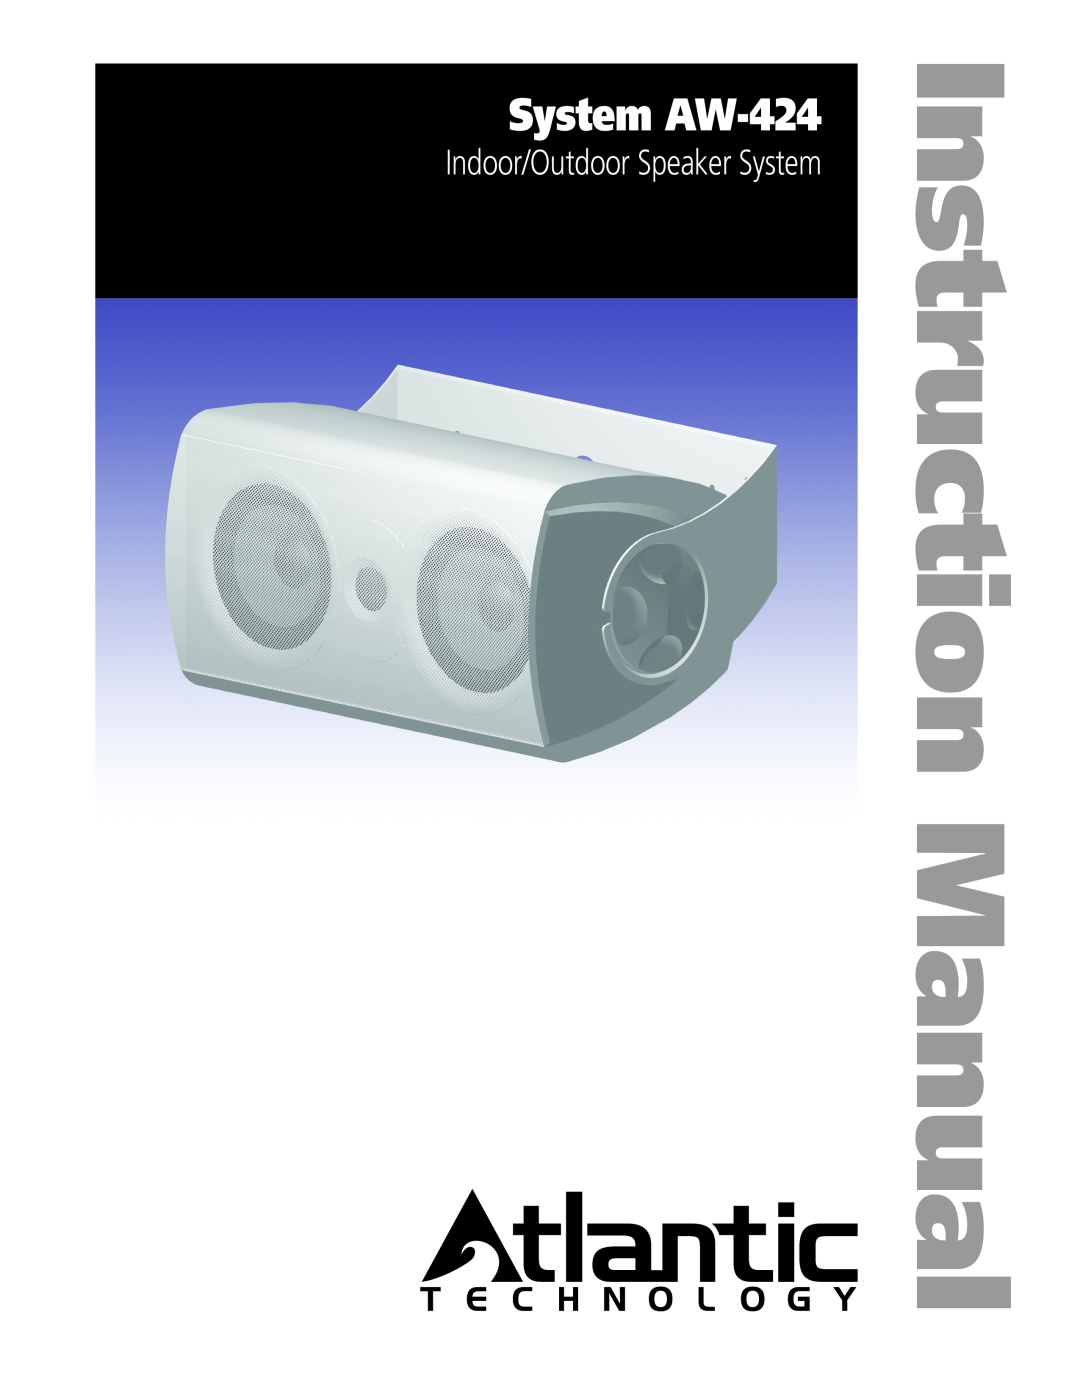 Atlantic Technology instruction manual System AW-424, Indoor/Outdoor Speaker System 